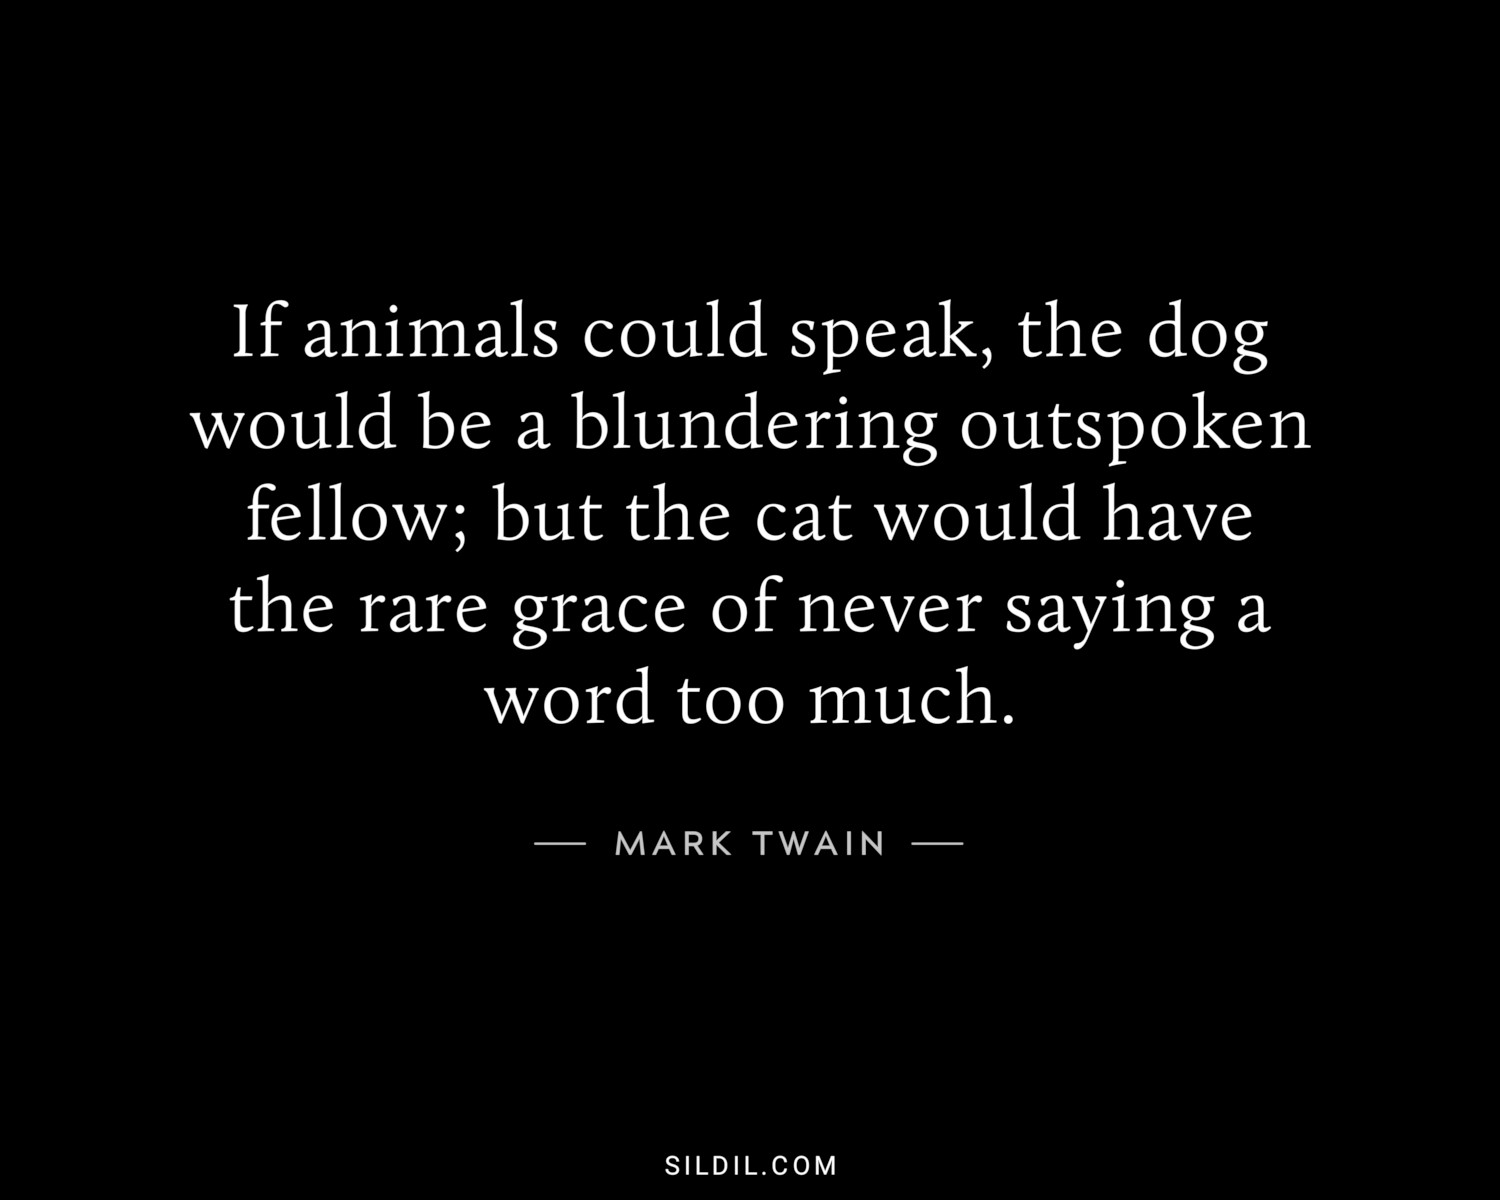 If animals could speak, the dog would be a blundering outspoken fellow; but the cat would have the rare grace of never saying a word too much.